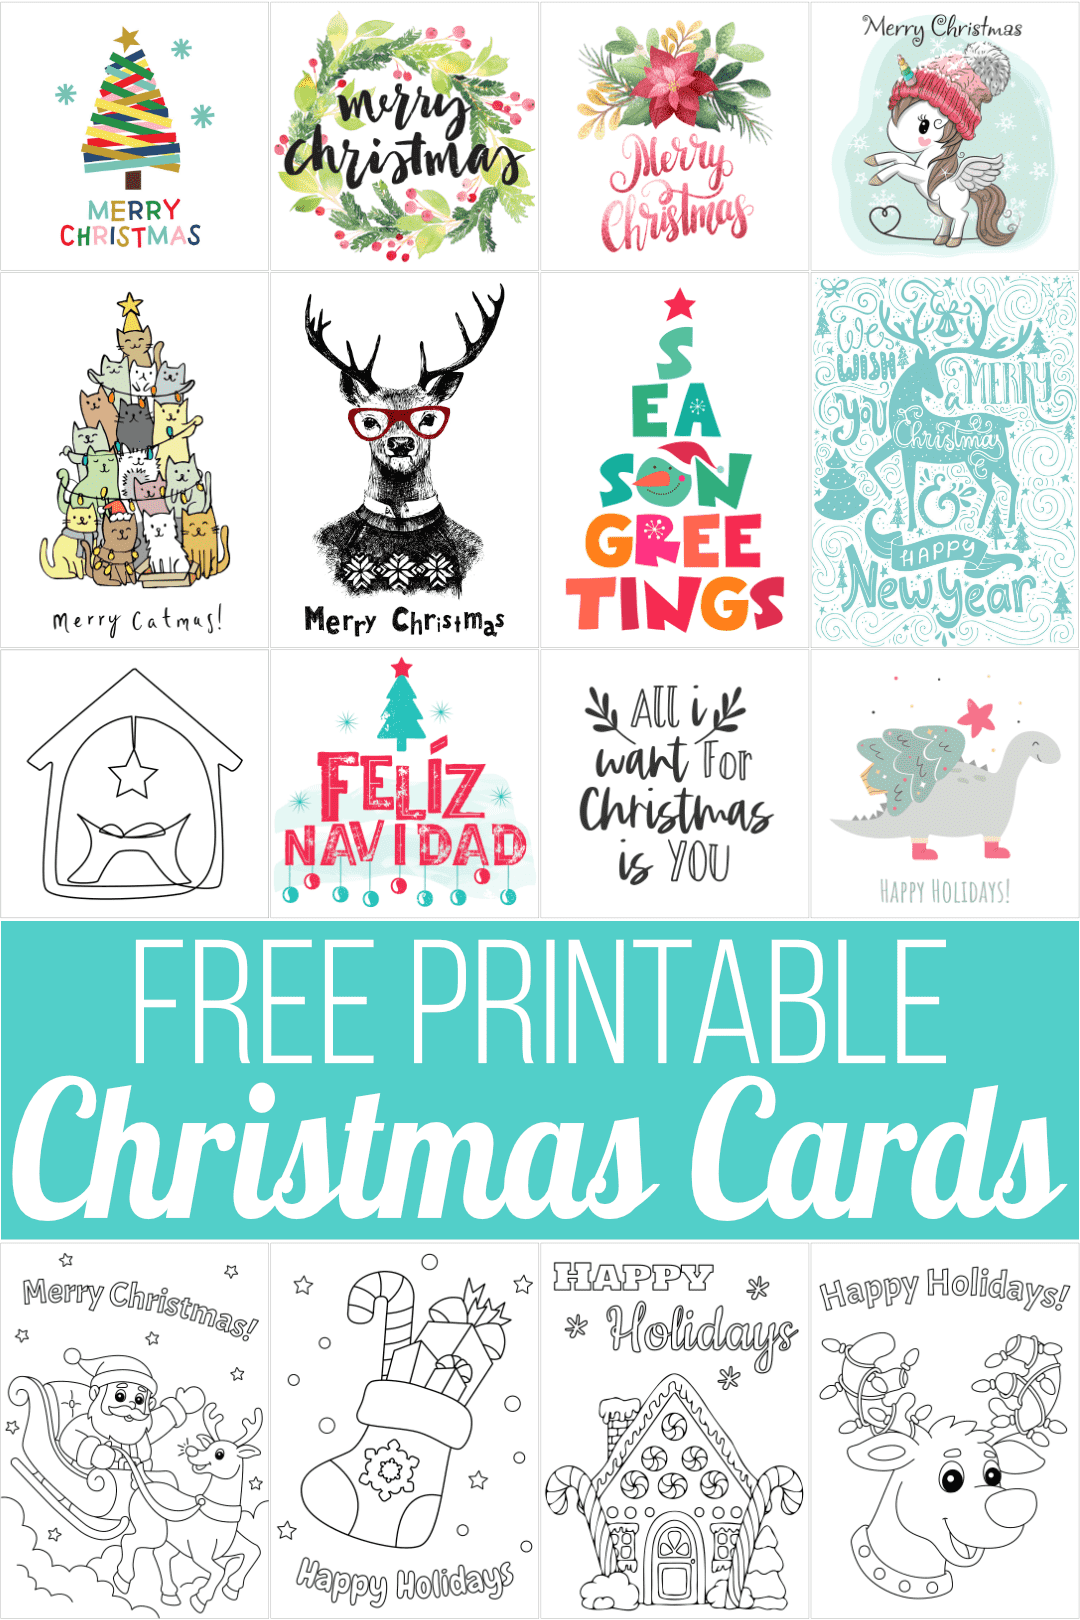 Free Printable Christmas Cards For Your Boss